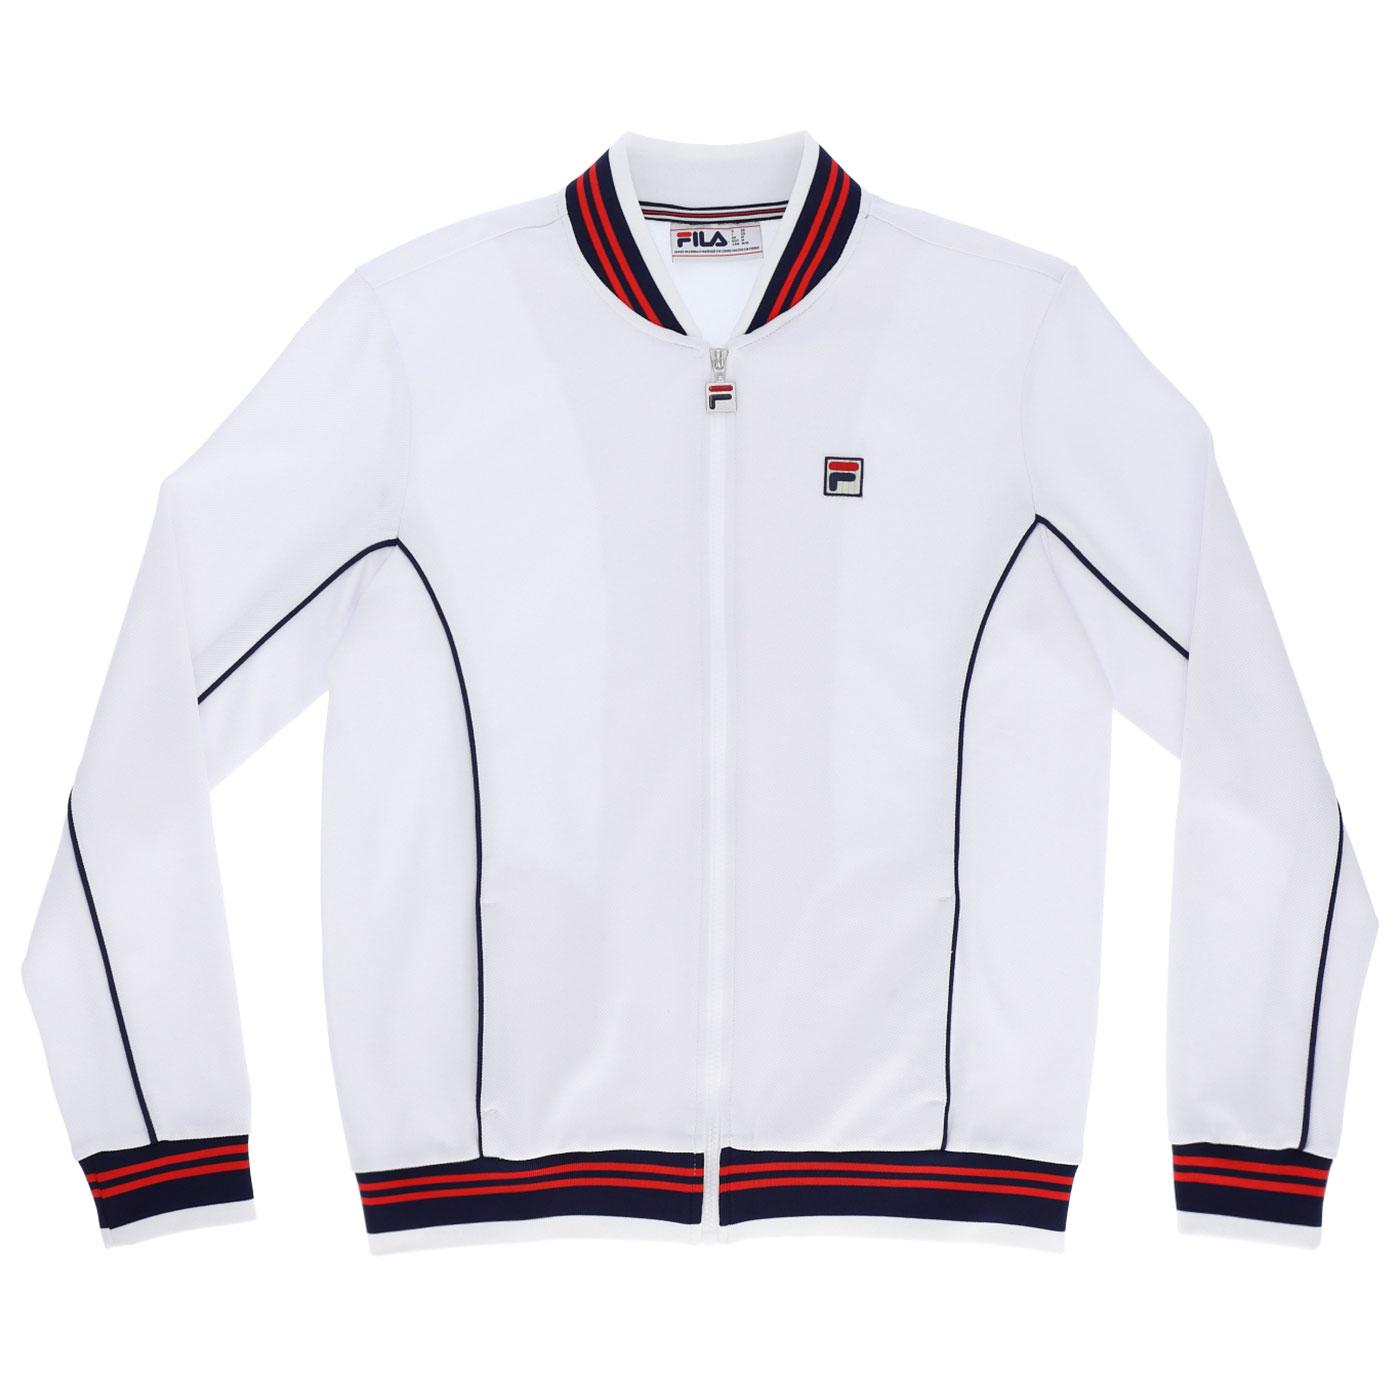 FILA VINTAGE Baranci Retro Tipped England Track Top in White